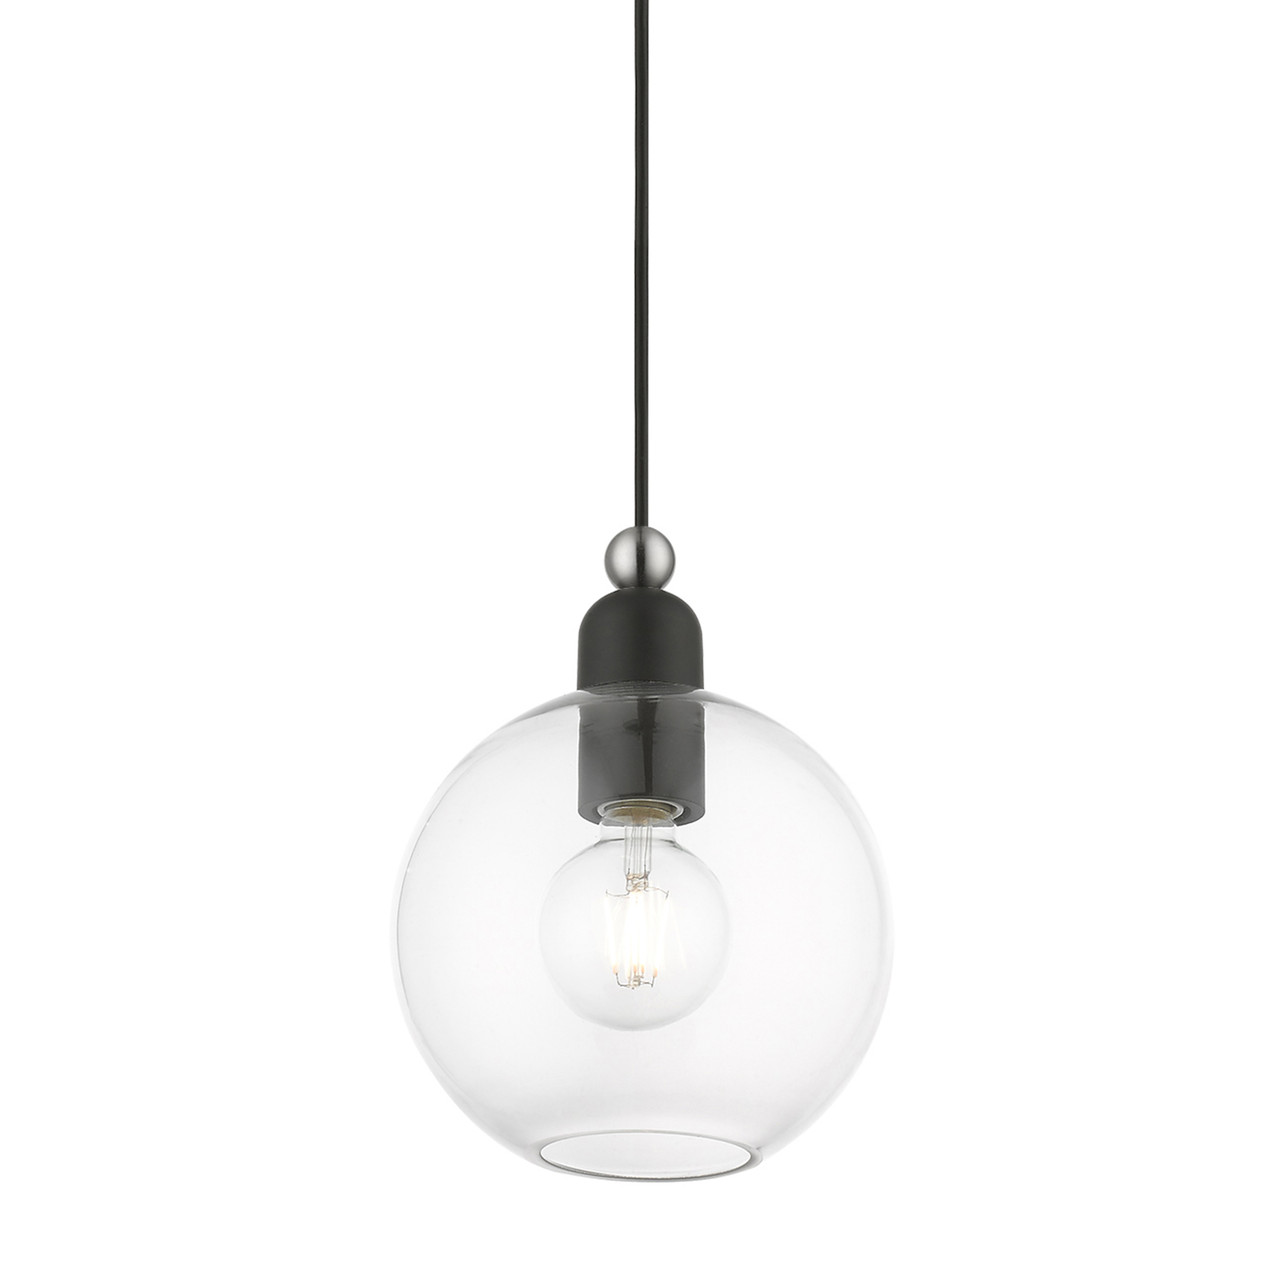 LIVEX LIGHTING 48972-04 1 Light Black with Brushed Nickel Accents Sphere Pendant